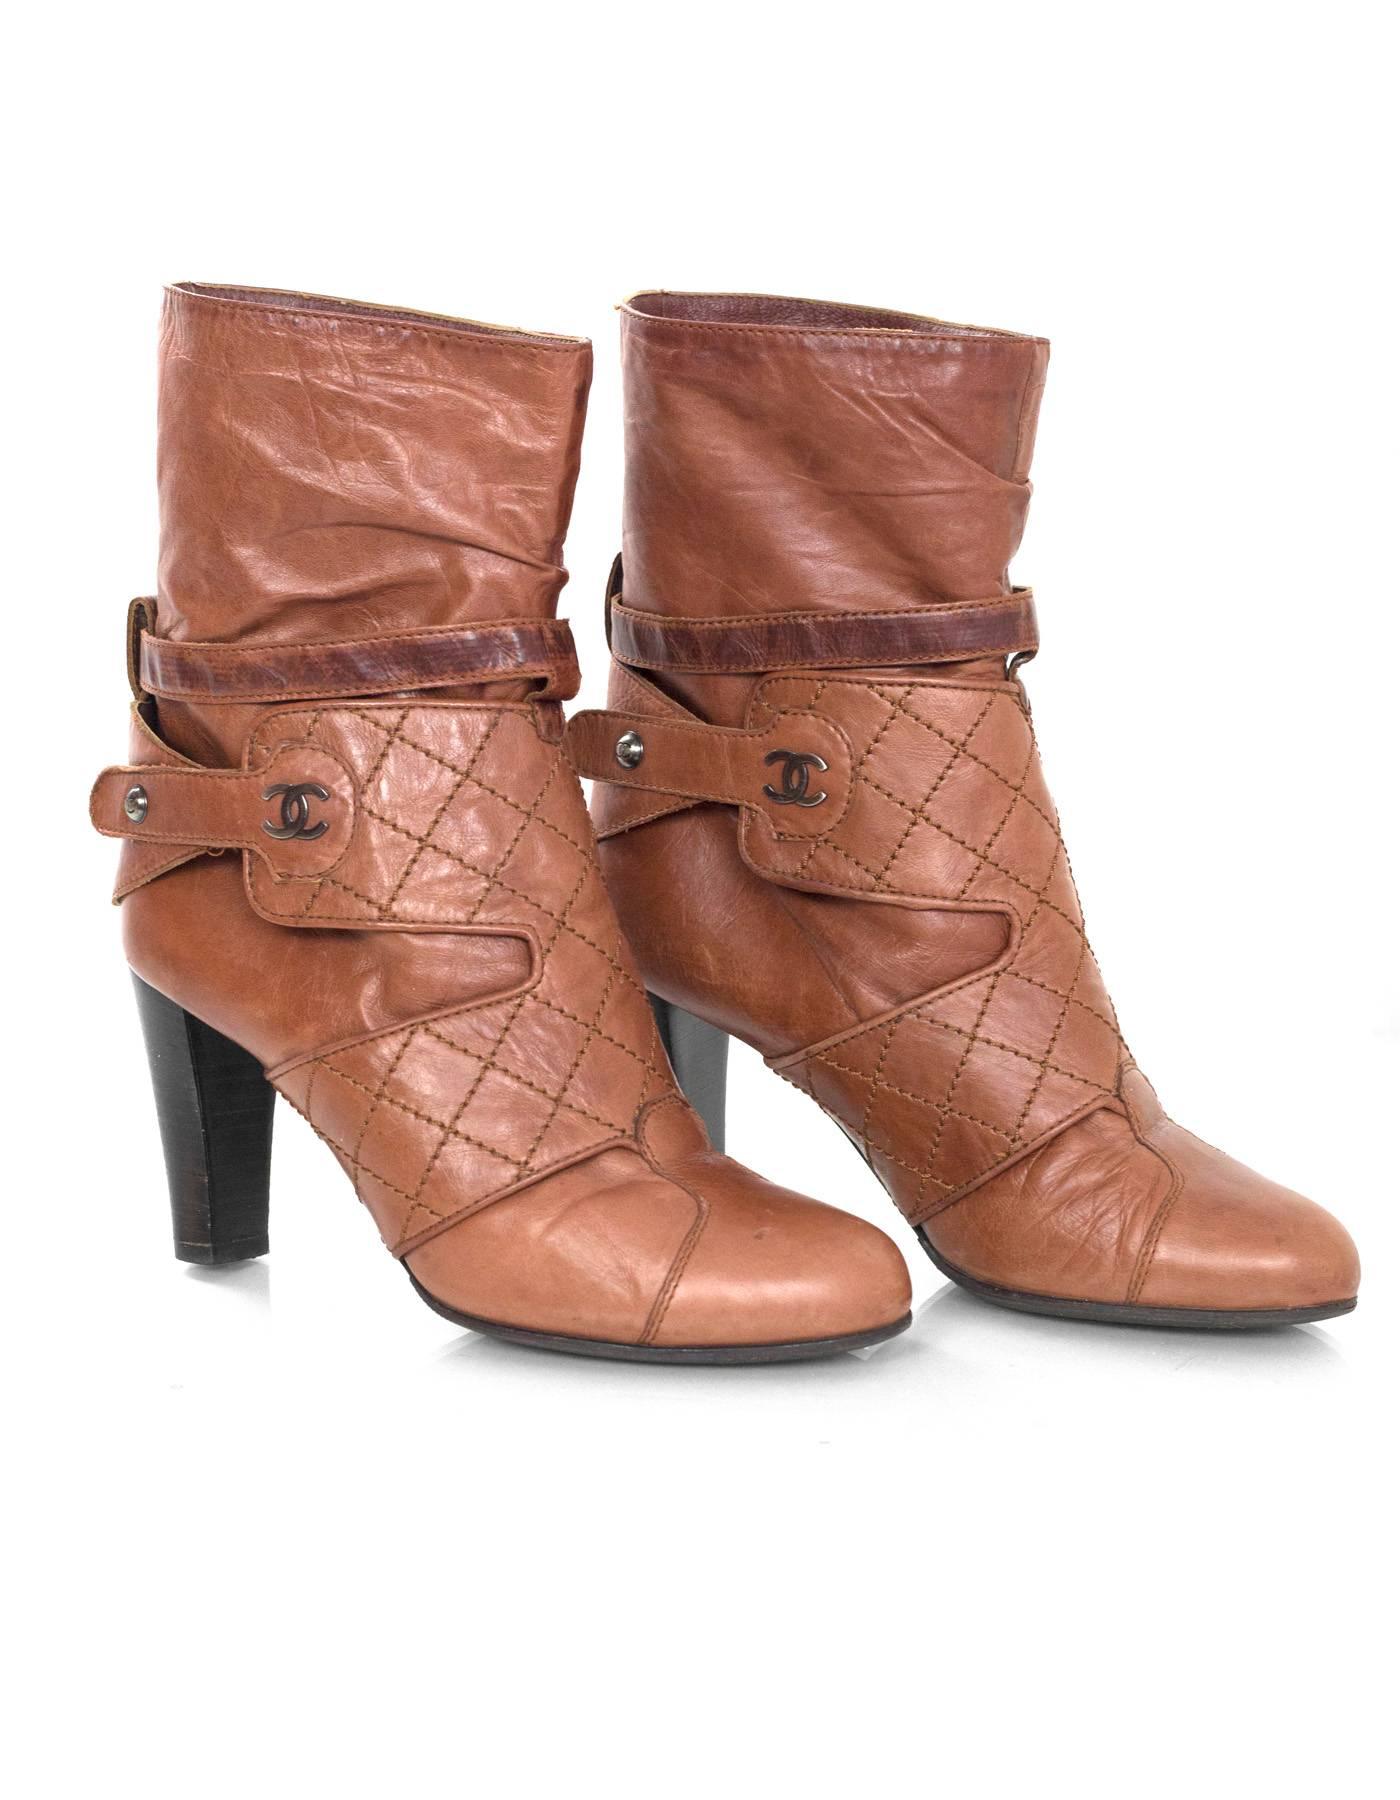 Women's Chanel Tan Leather Ankle Boots Sz 37